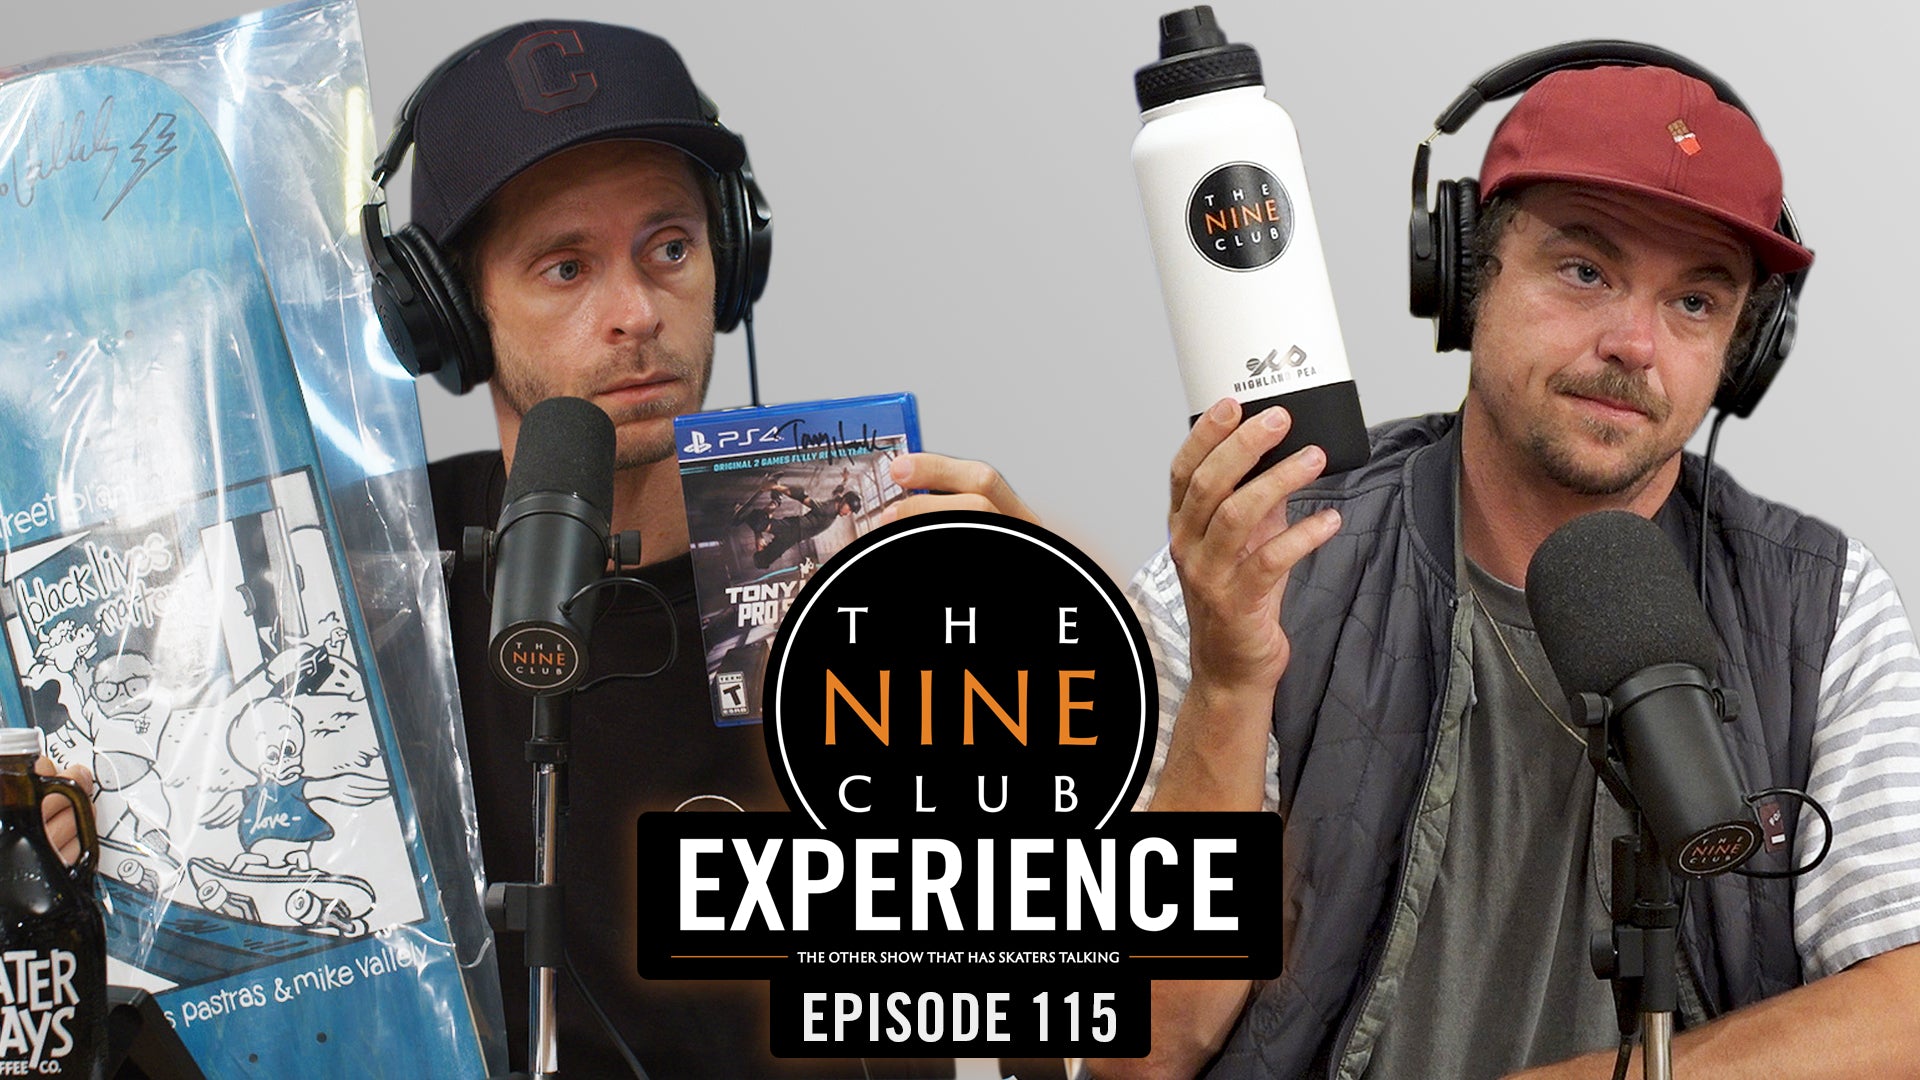 The Nine Club Experience Episode 115